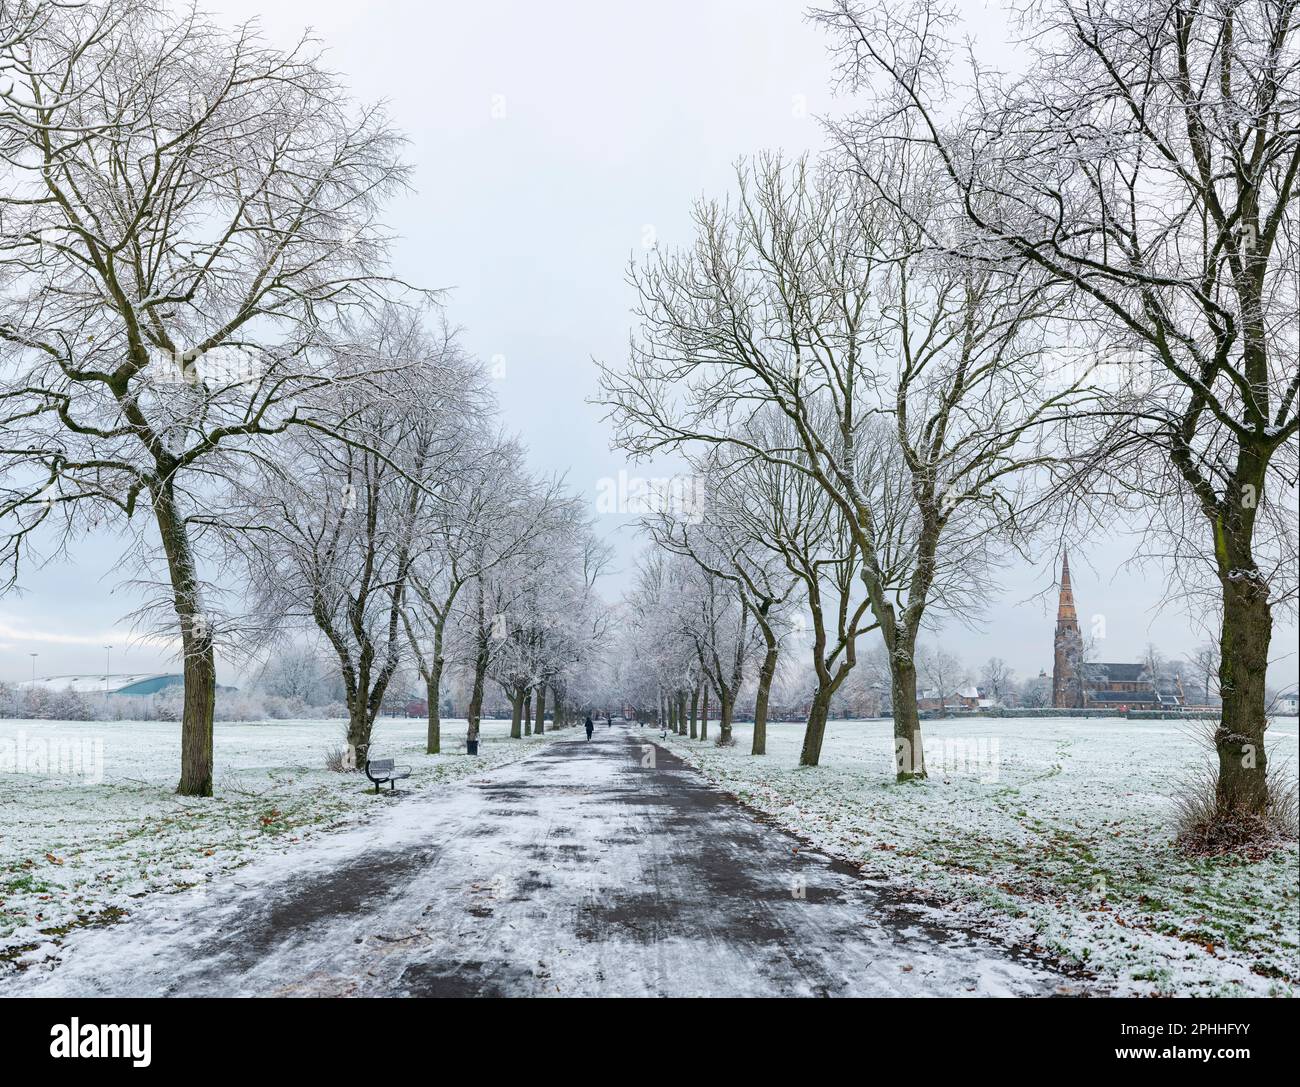 Avenue of trees in Platt Fields Park in South Manchester on a snowy and frosty winters morning, with the Holy Trinity Platt church in the distance. Stock Photo